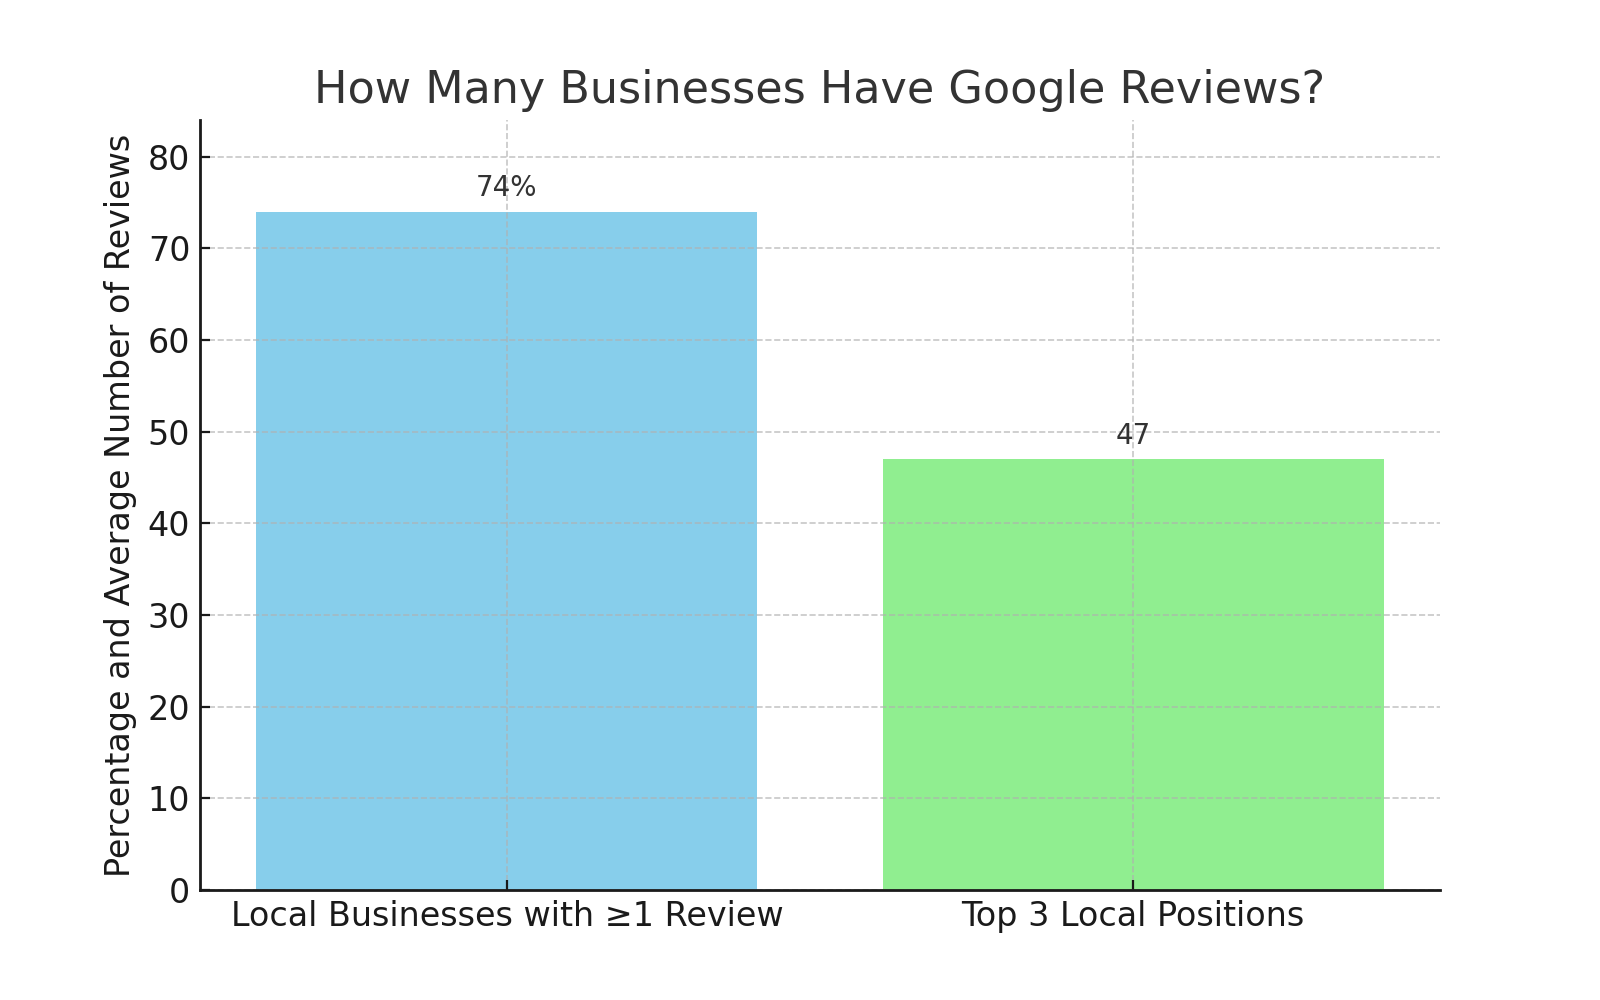 How many businesses have Google reviews